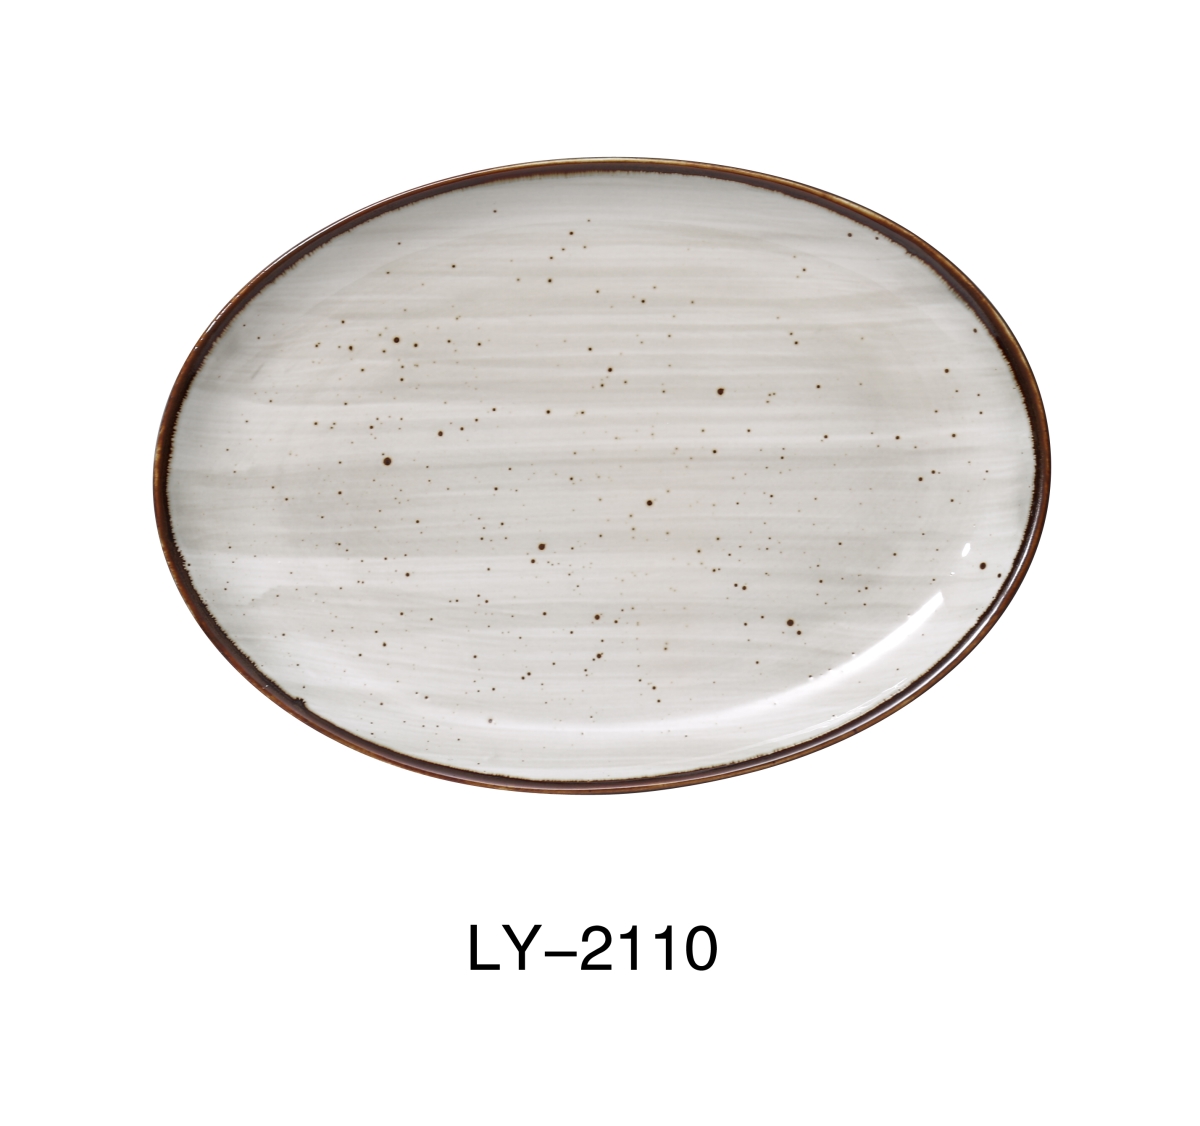 Picture of Yanco LY-2110 Lyon 10 x 7 x 1 in. Coupe Platter, Reactive Glaze - Pack of 24